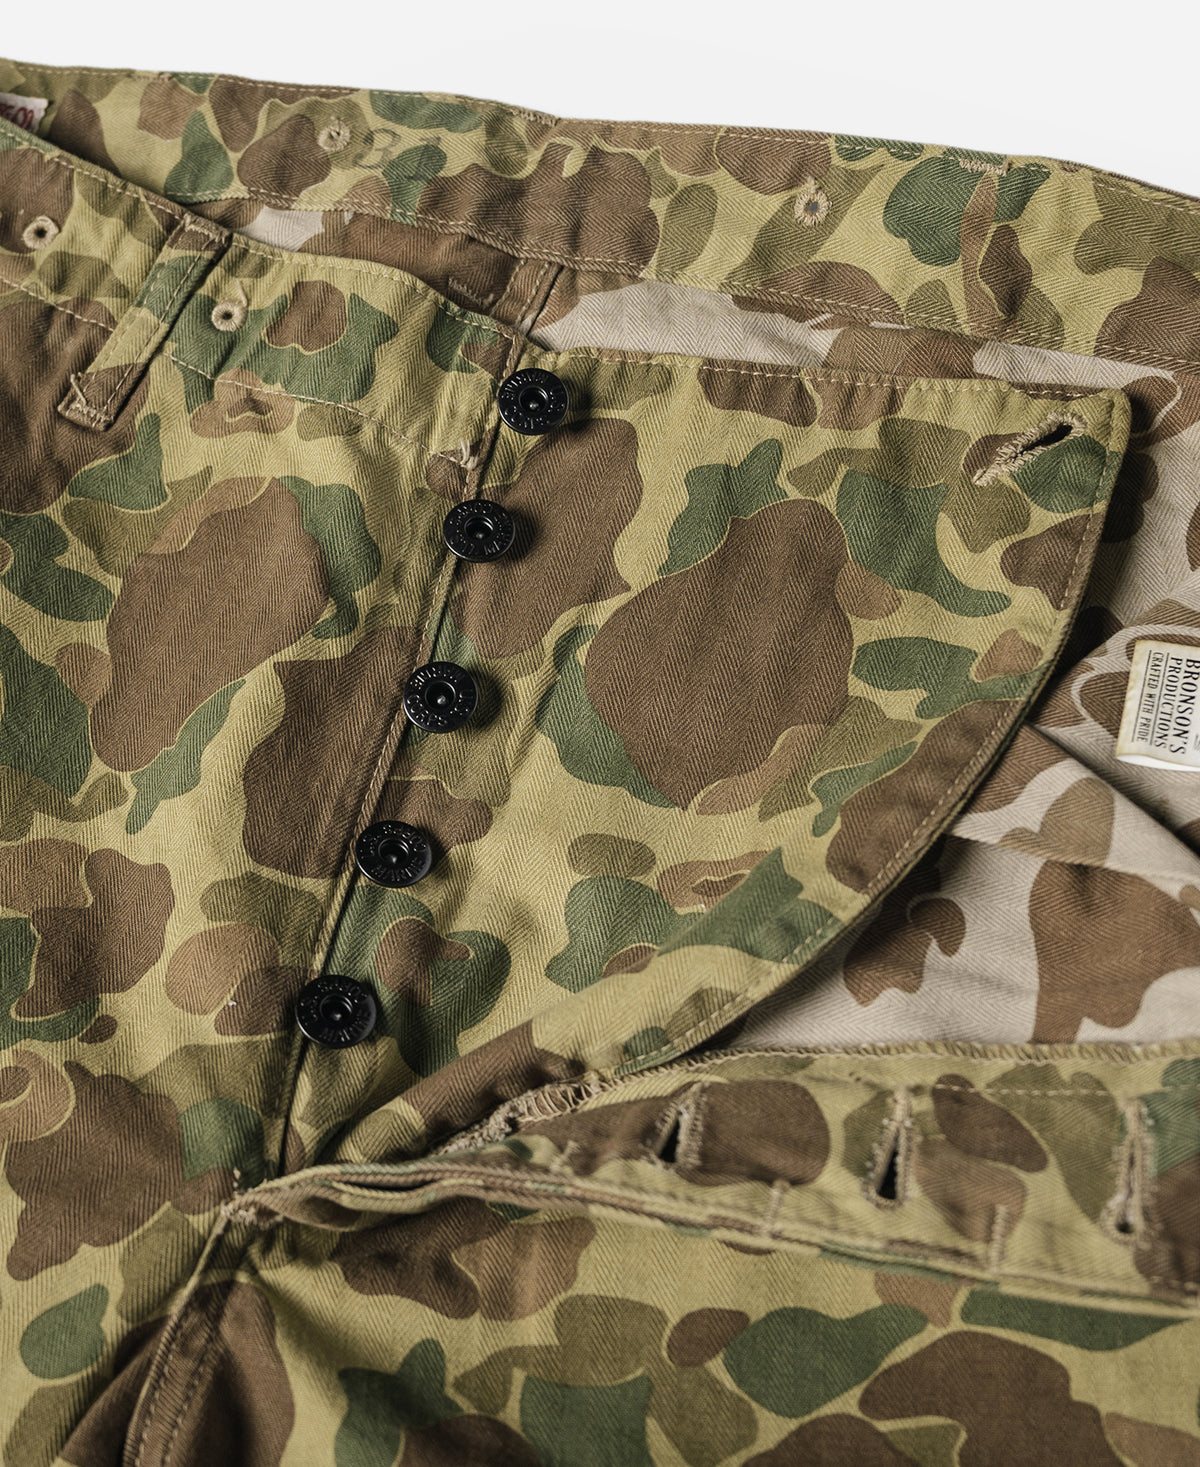 US Army M-1943 Herringbone Cotton Camouflage Pants (Modified)